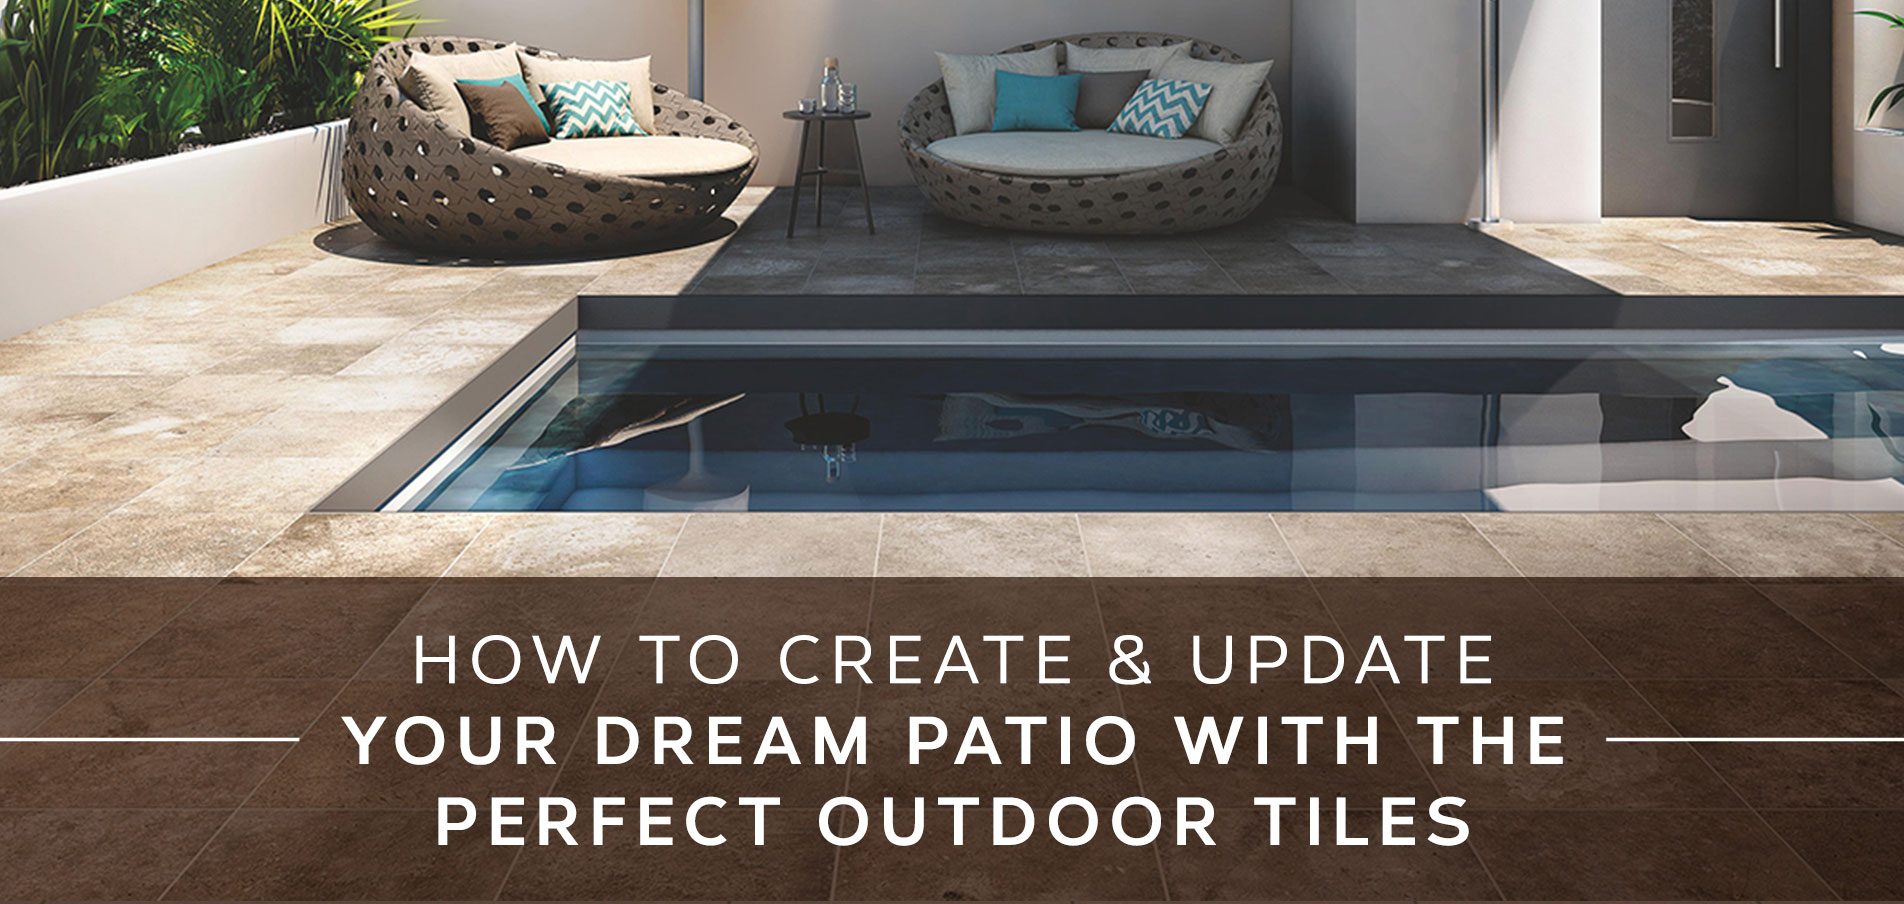 How To Create & Update Your Dream Patio with The Perfect Outdoor Tiles